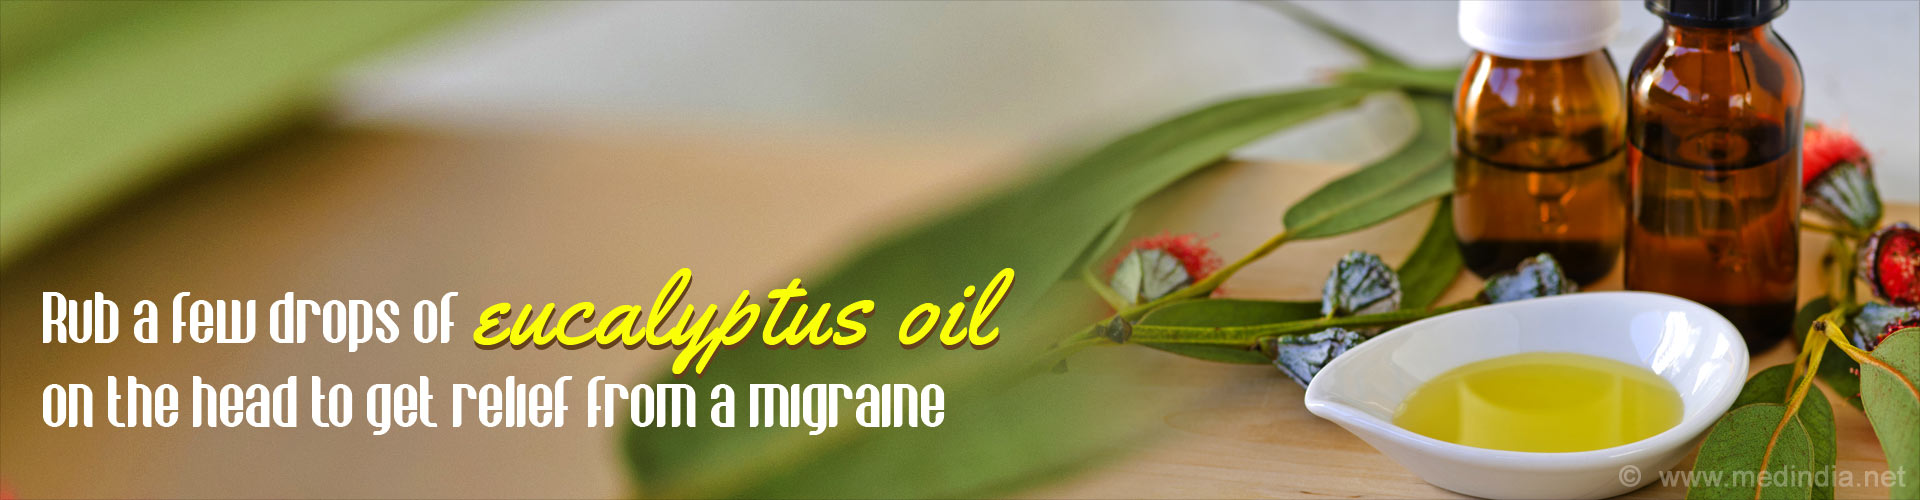 Rub a few drops eucalyptus oil on the head to get relief from a migraine
